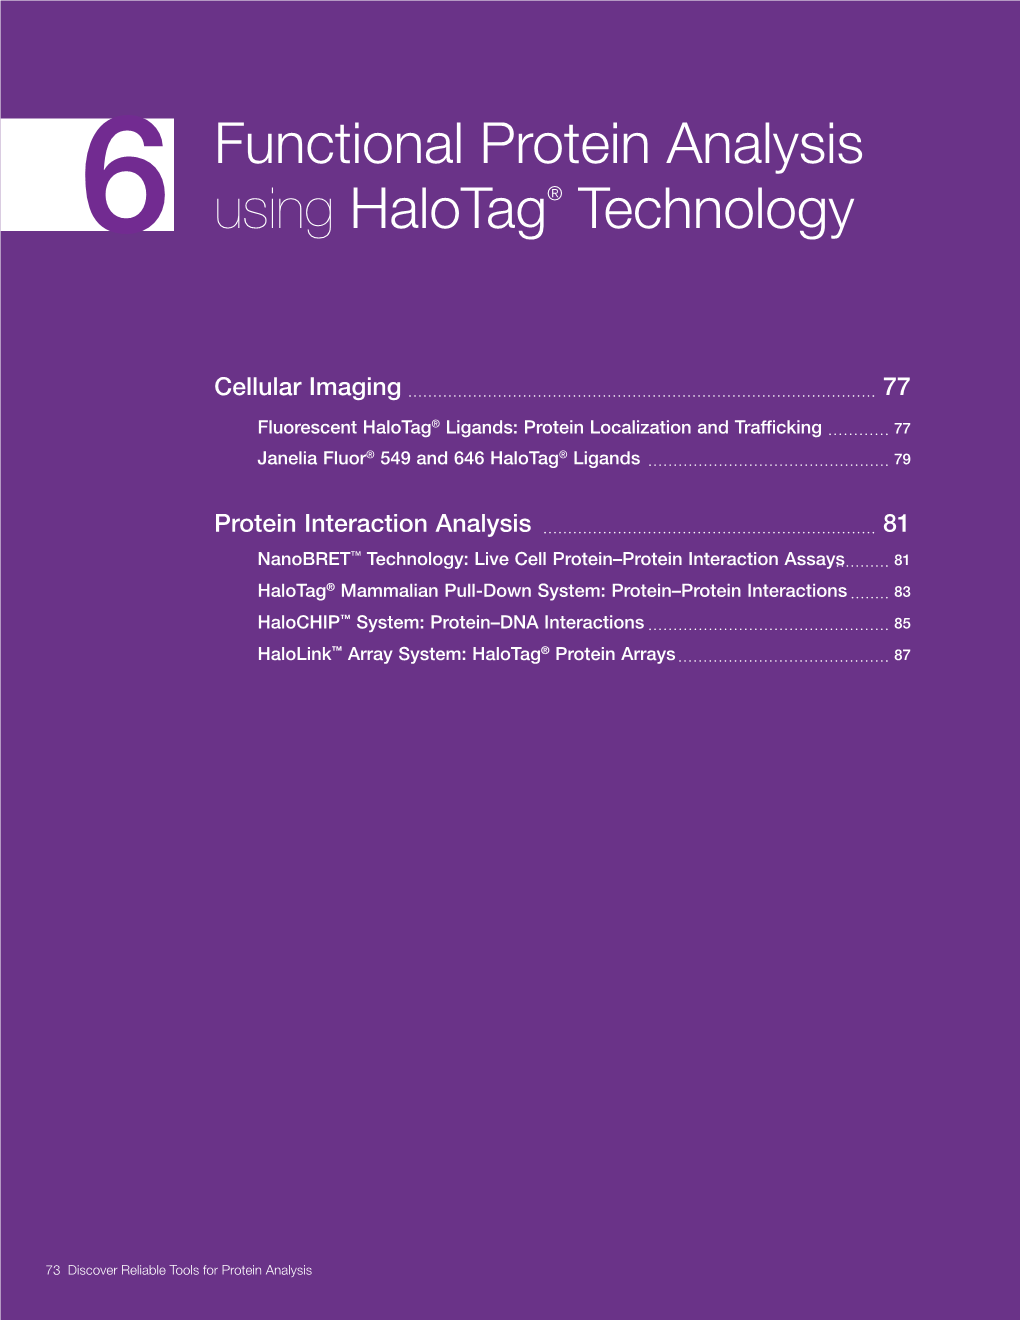 Functional Protein Analysis Using Halotag® Technology Understanding the Functional Role of Proteins and Their Intracellular Behavior Is Increasingly Important